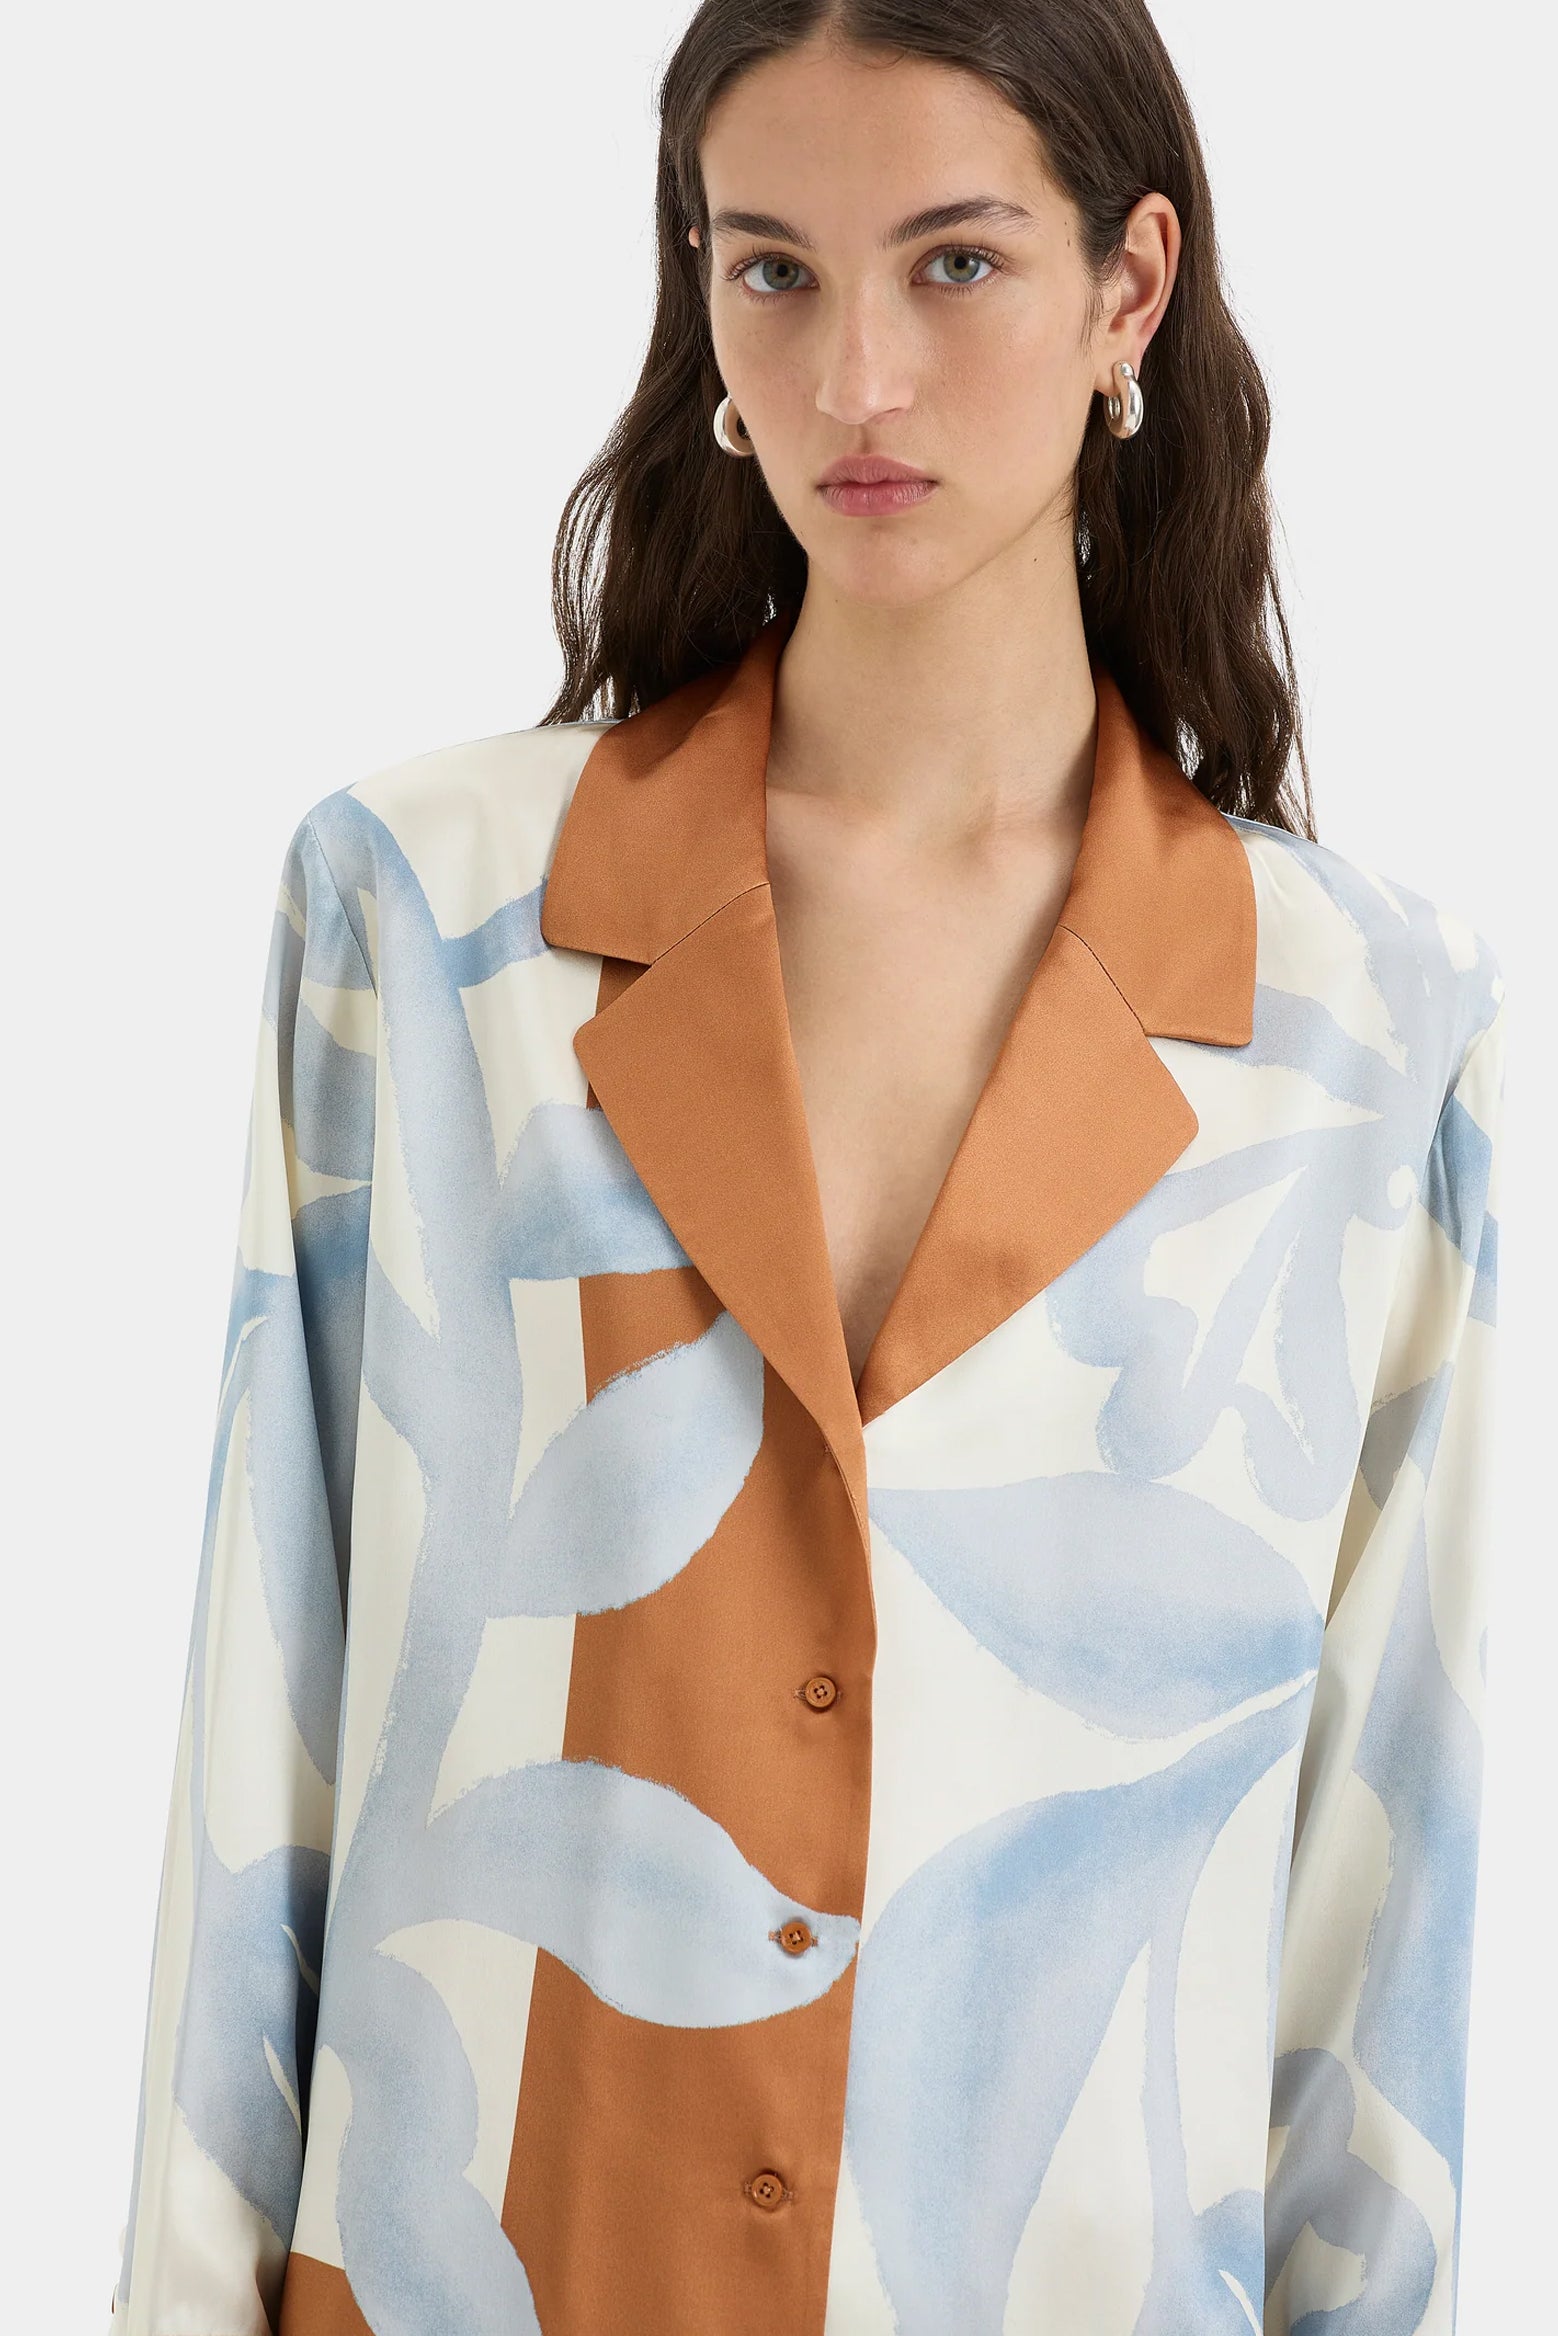 SIR Sorrento Shirt in Sciarpa Print available at The New Trend Australia.